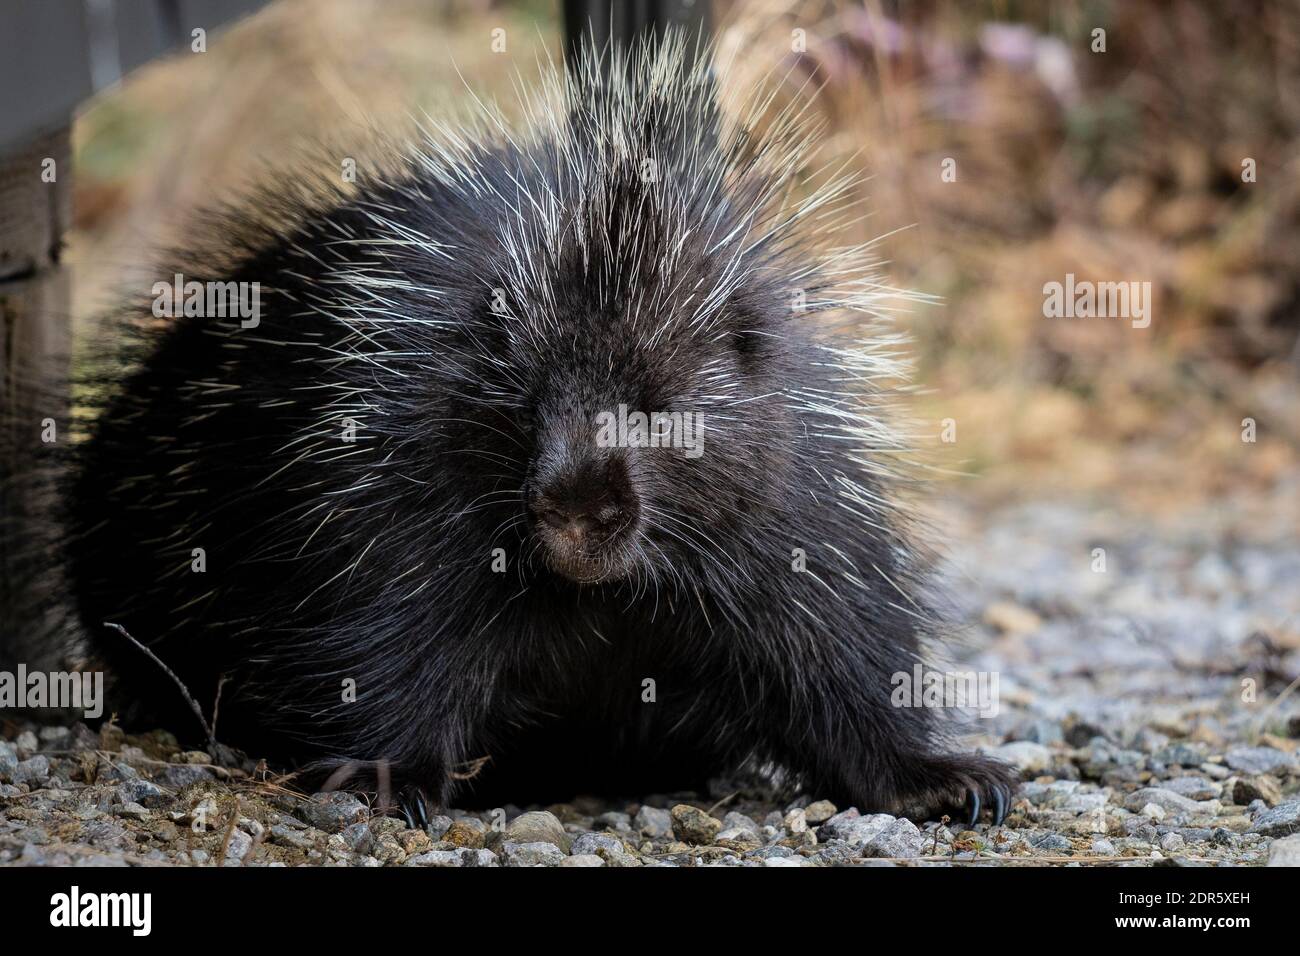 The nearsighted and slow-moving North American Porcupine in search of food. Stock Photo